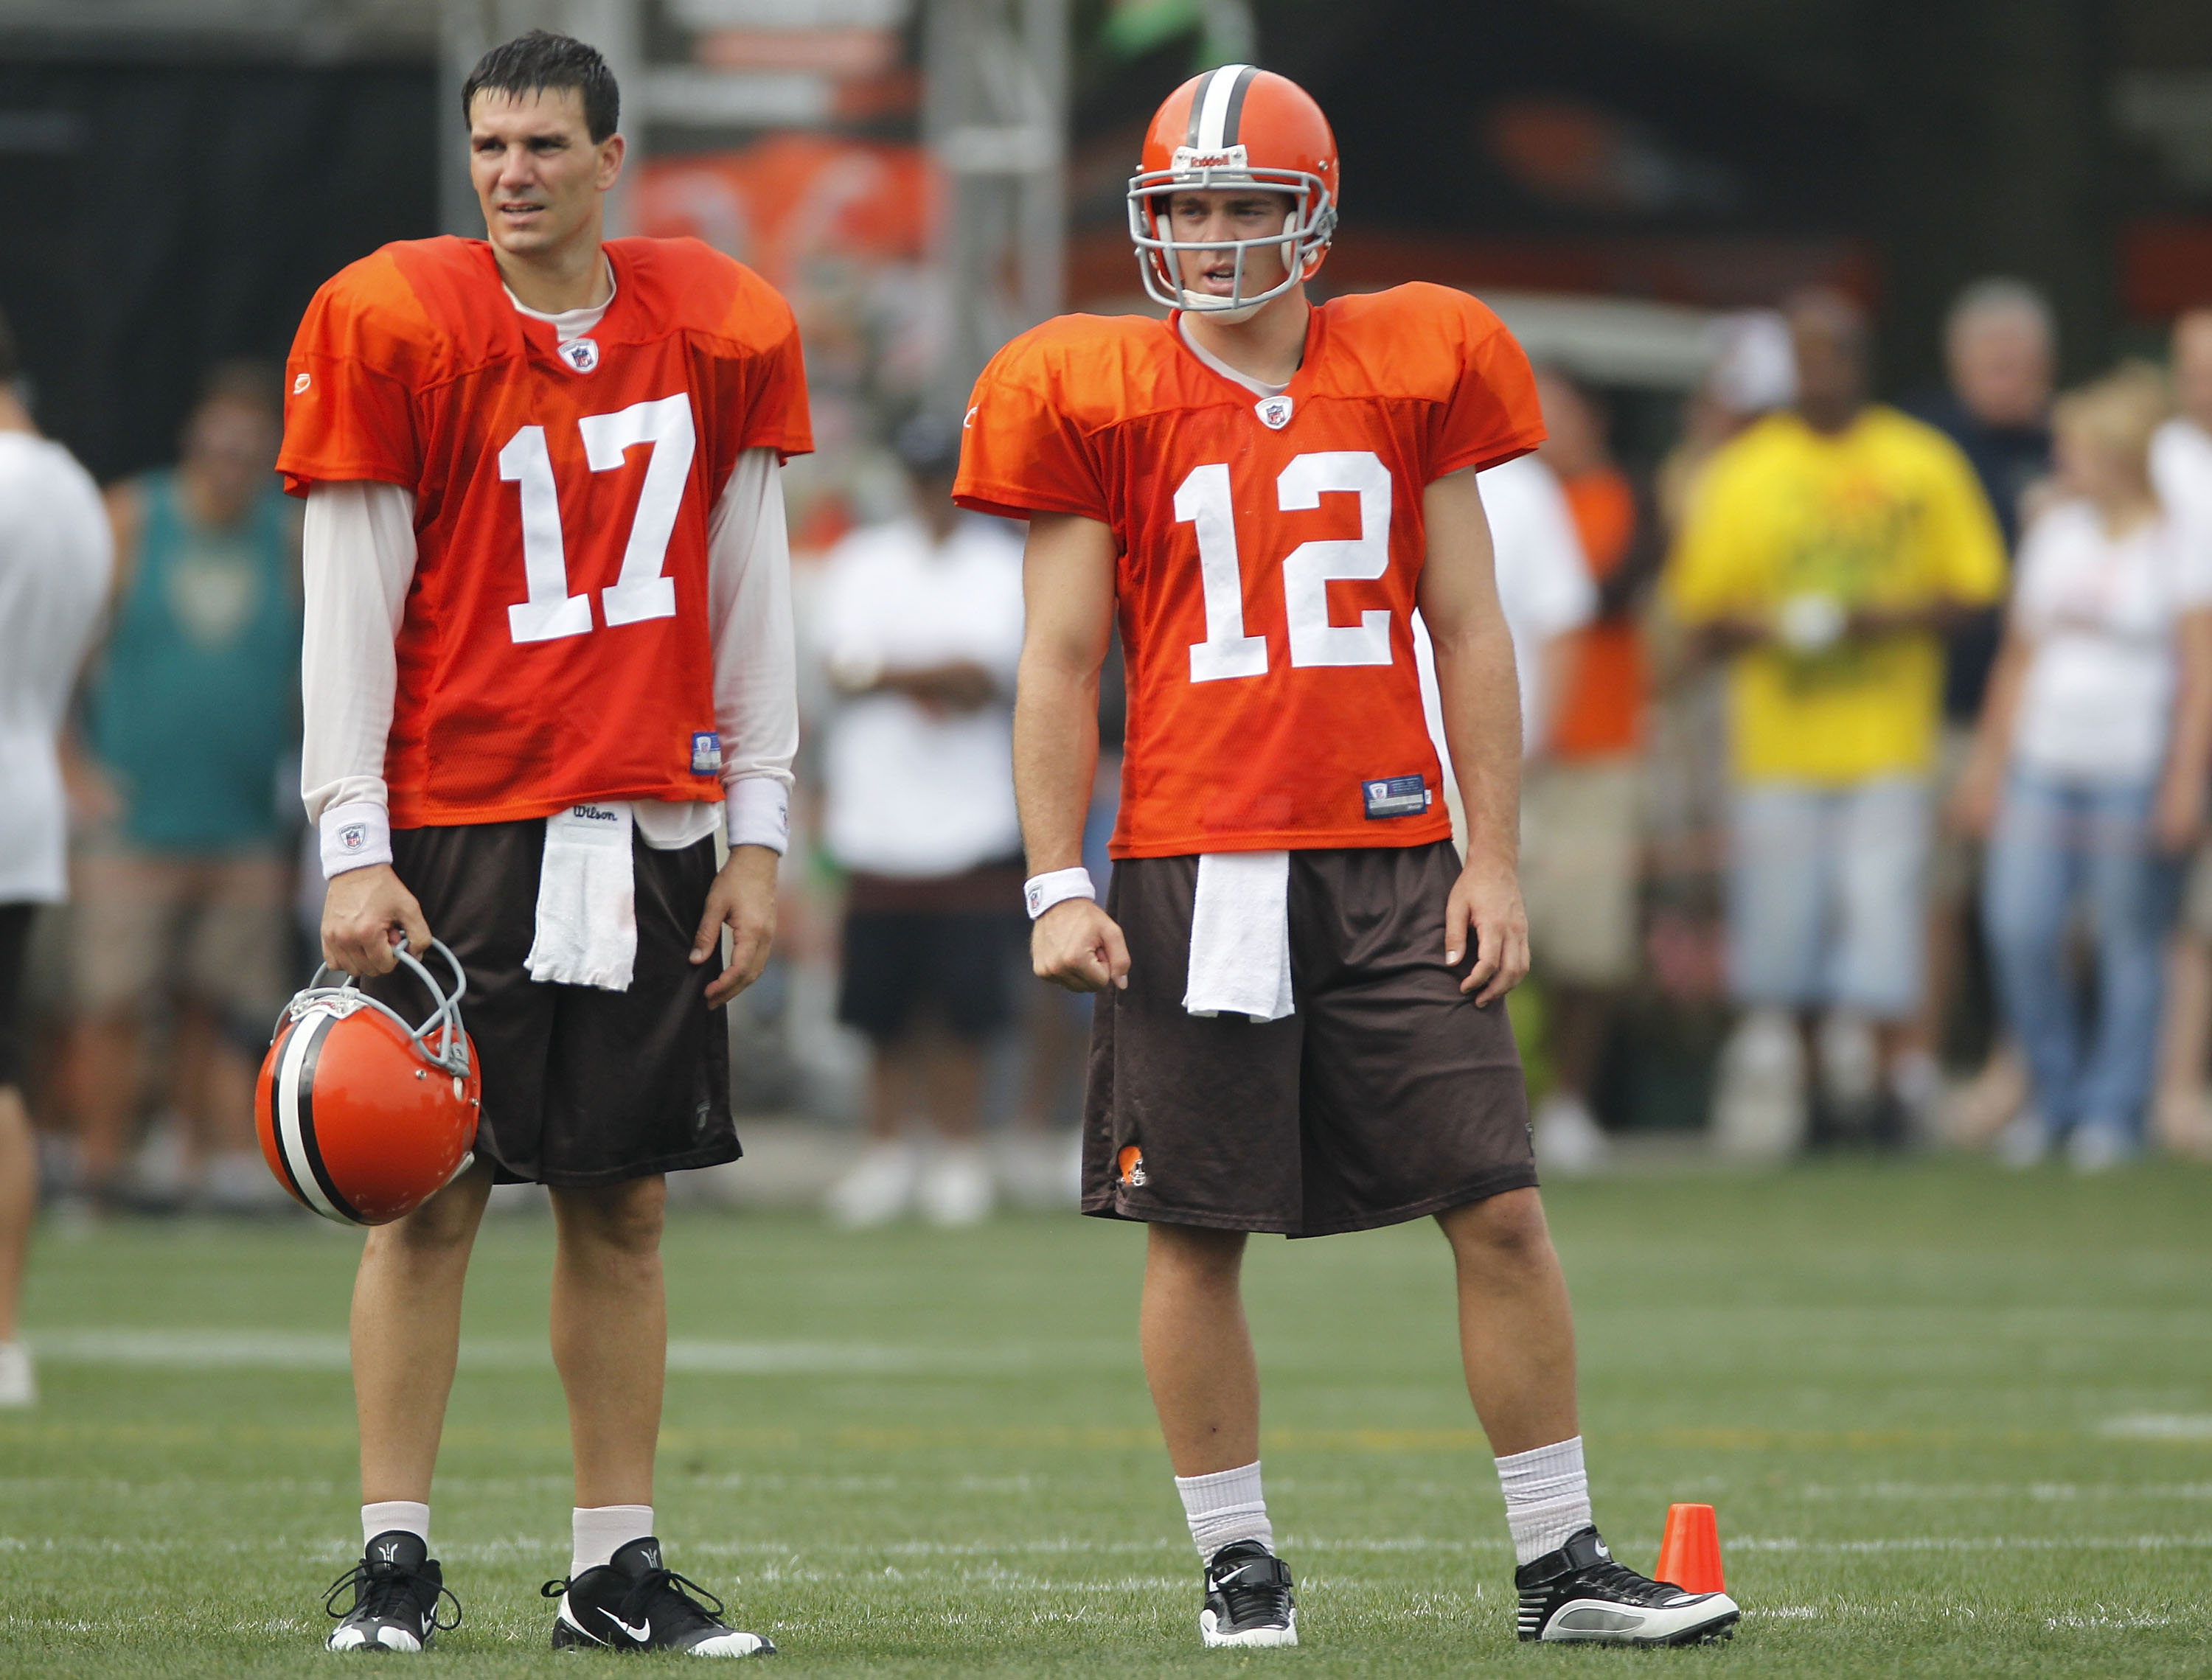 BEREA, OH - AUGUST 04:  Jake Delhomme #17 and Colt McCoy #12 of the Cleveland Browns stand next to each other during training camp at the Cleveland Browns Training and Administrative Complex on August 4, 2010 in Berea, Ohio.  (Photo by Gregory Shamus/Gett